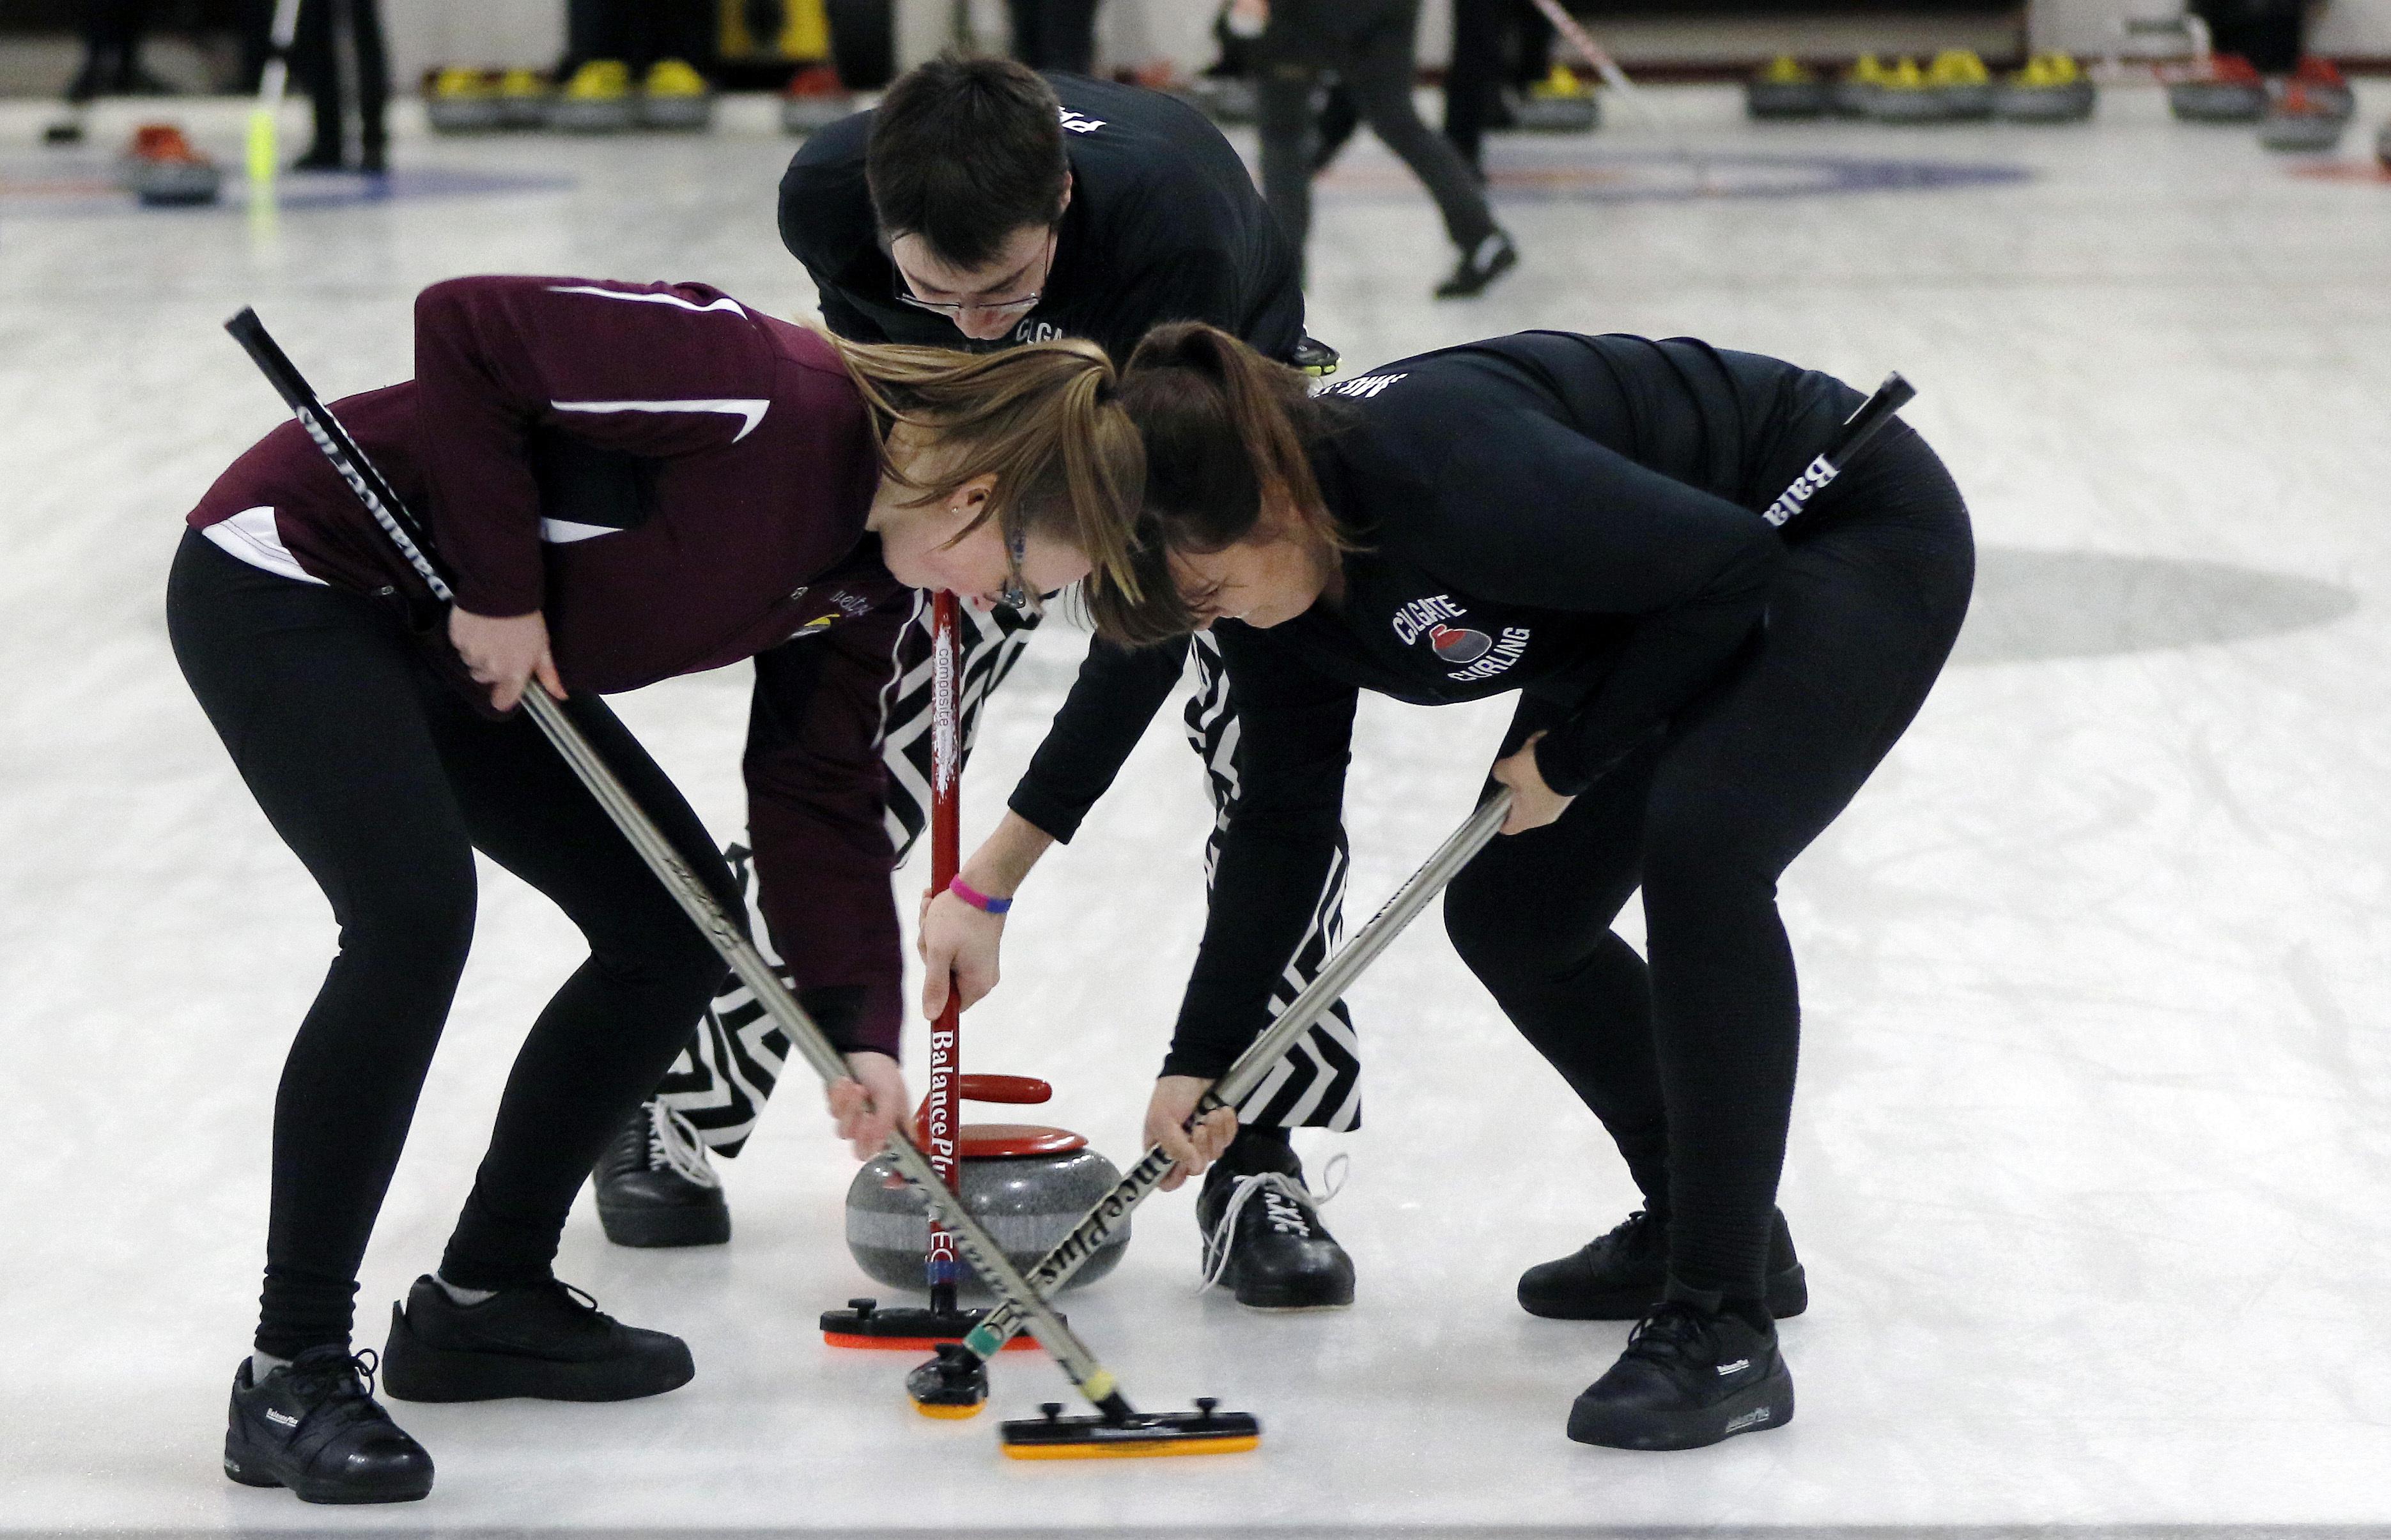 As curling grows, it finds a new target college campuses The